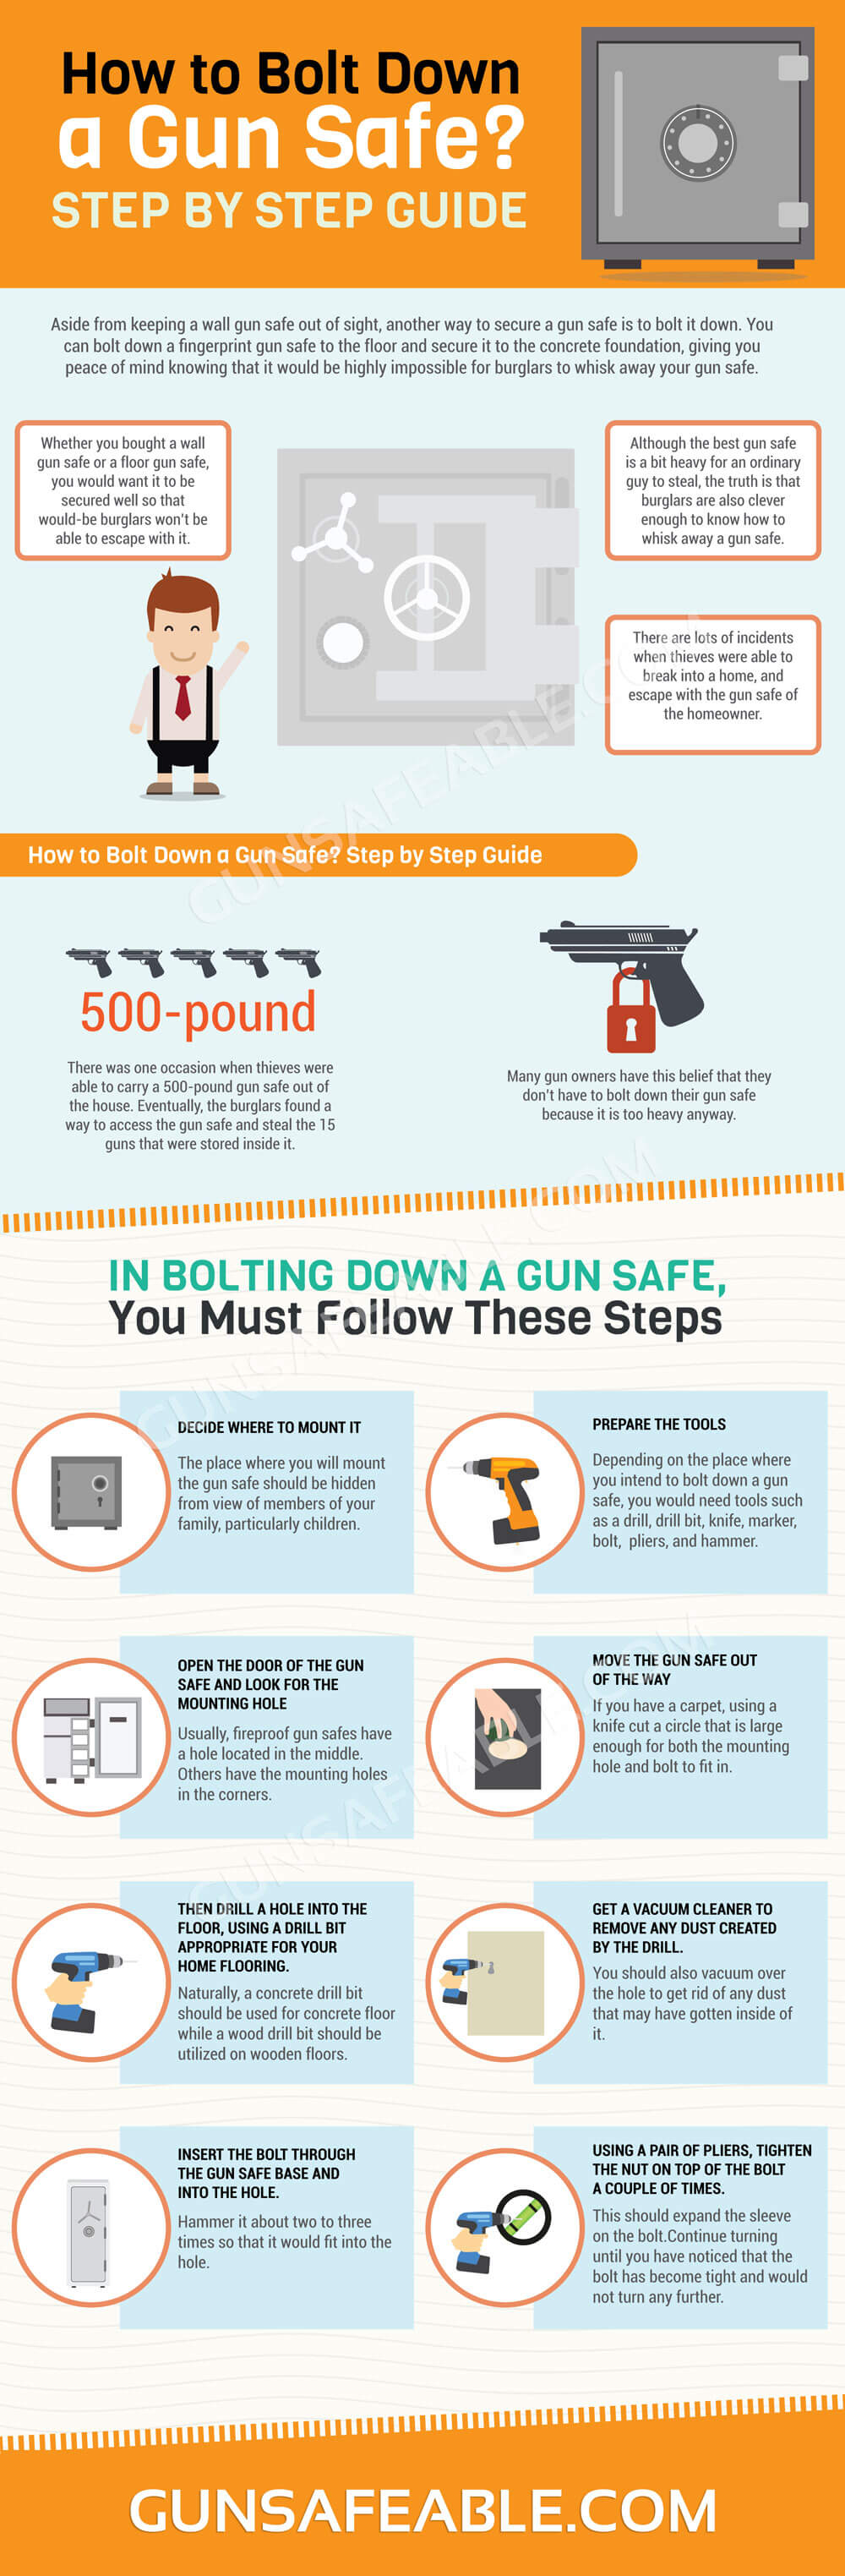 [INFOGRAPHIC] How to Bolt Down a Gun Safe? Step by Step Guide